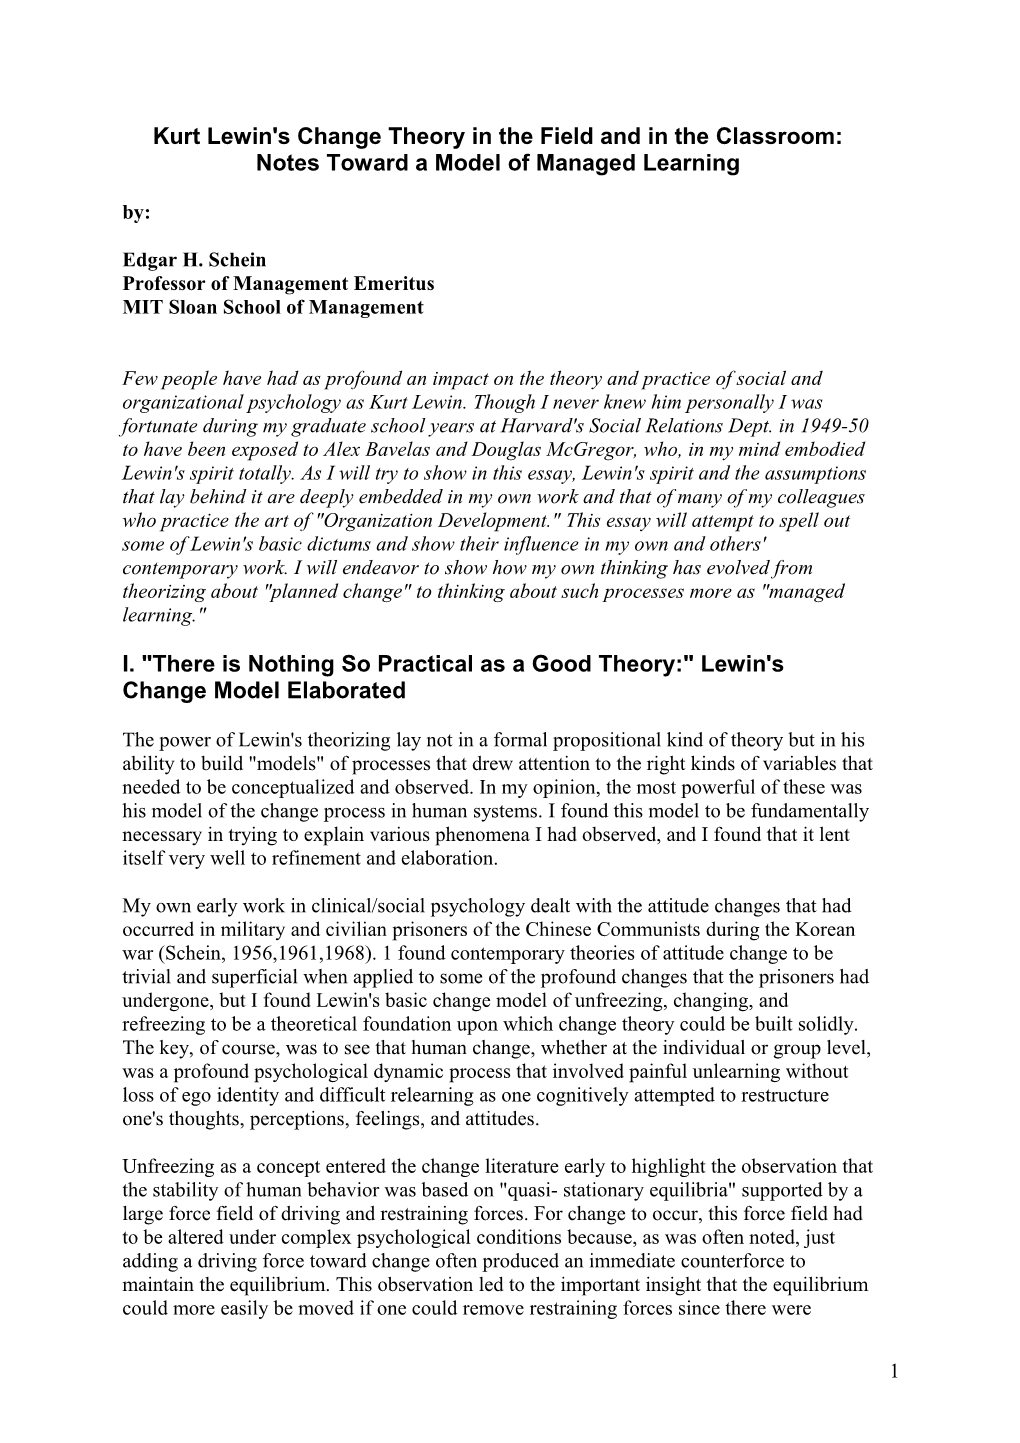 Kurt Lewin's Change Theory in the Field and in the Classroom: Notes Toward a Model of Managed